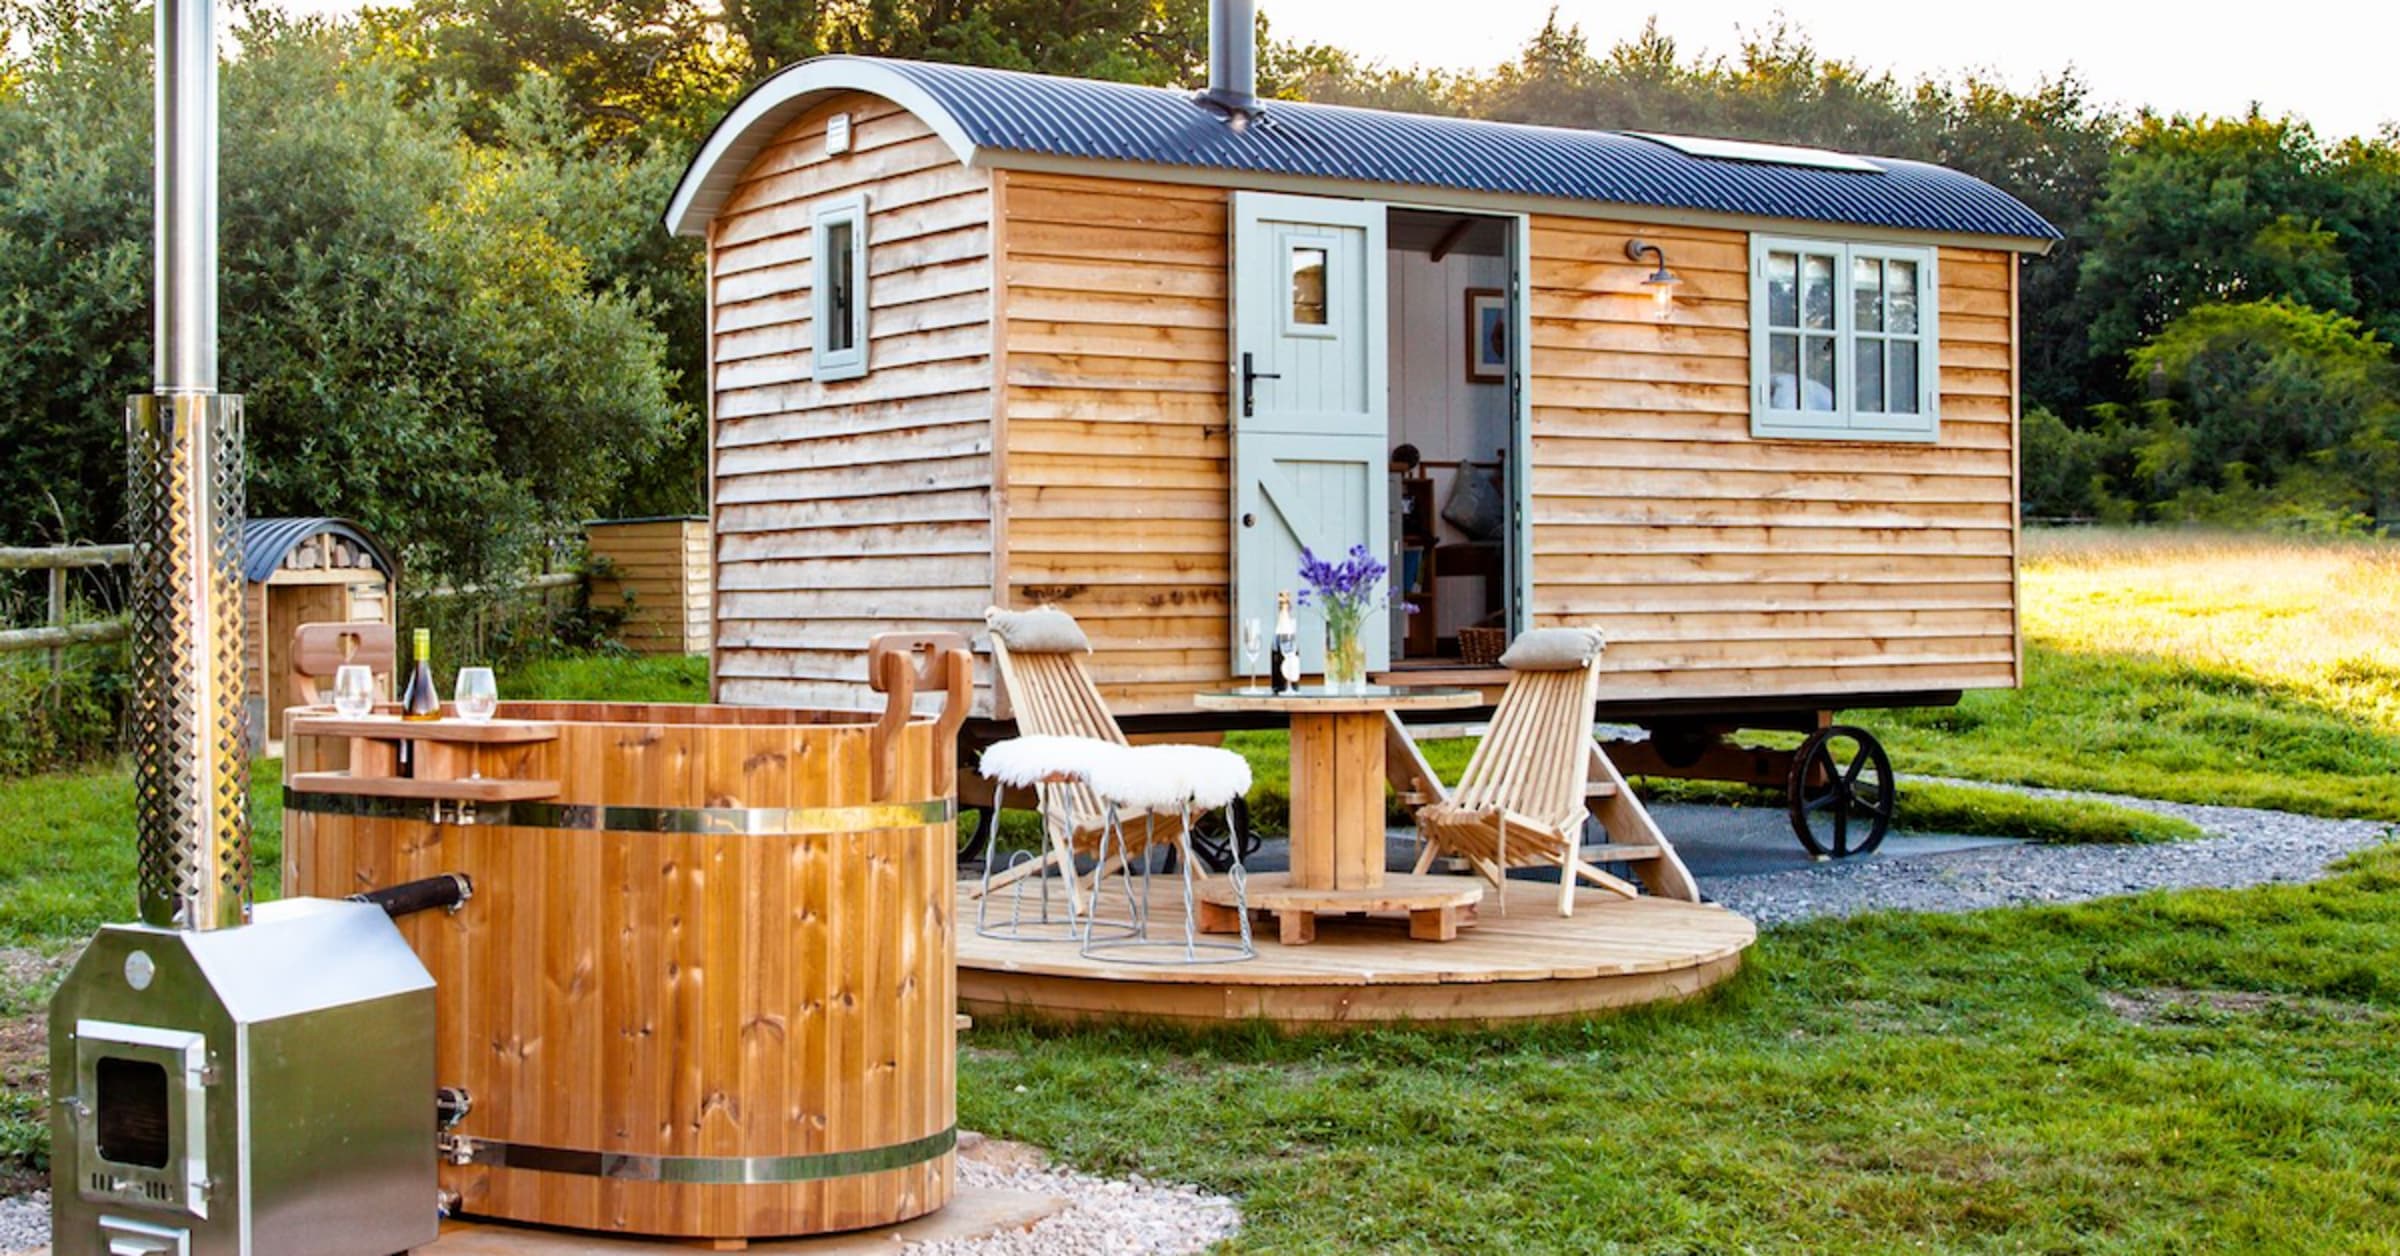 Hot tub glamping in the UK